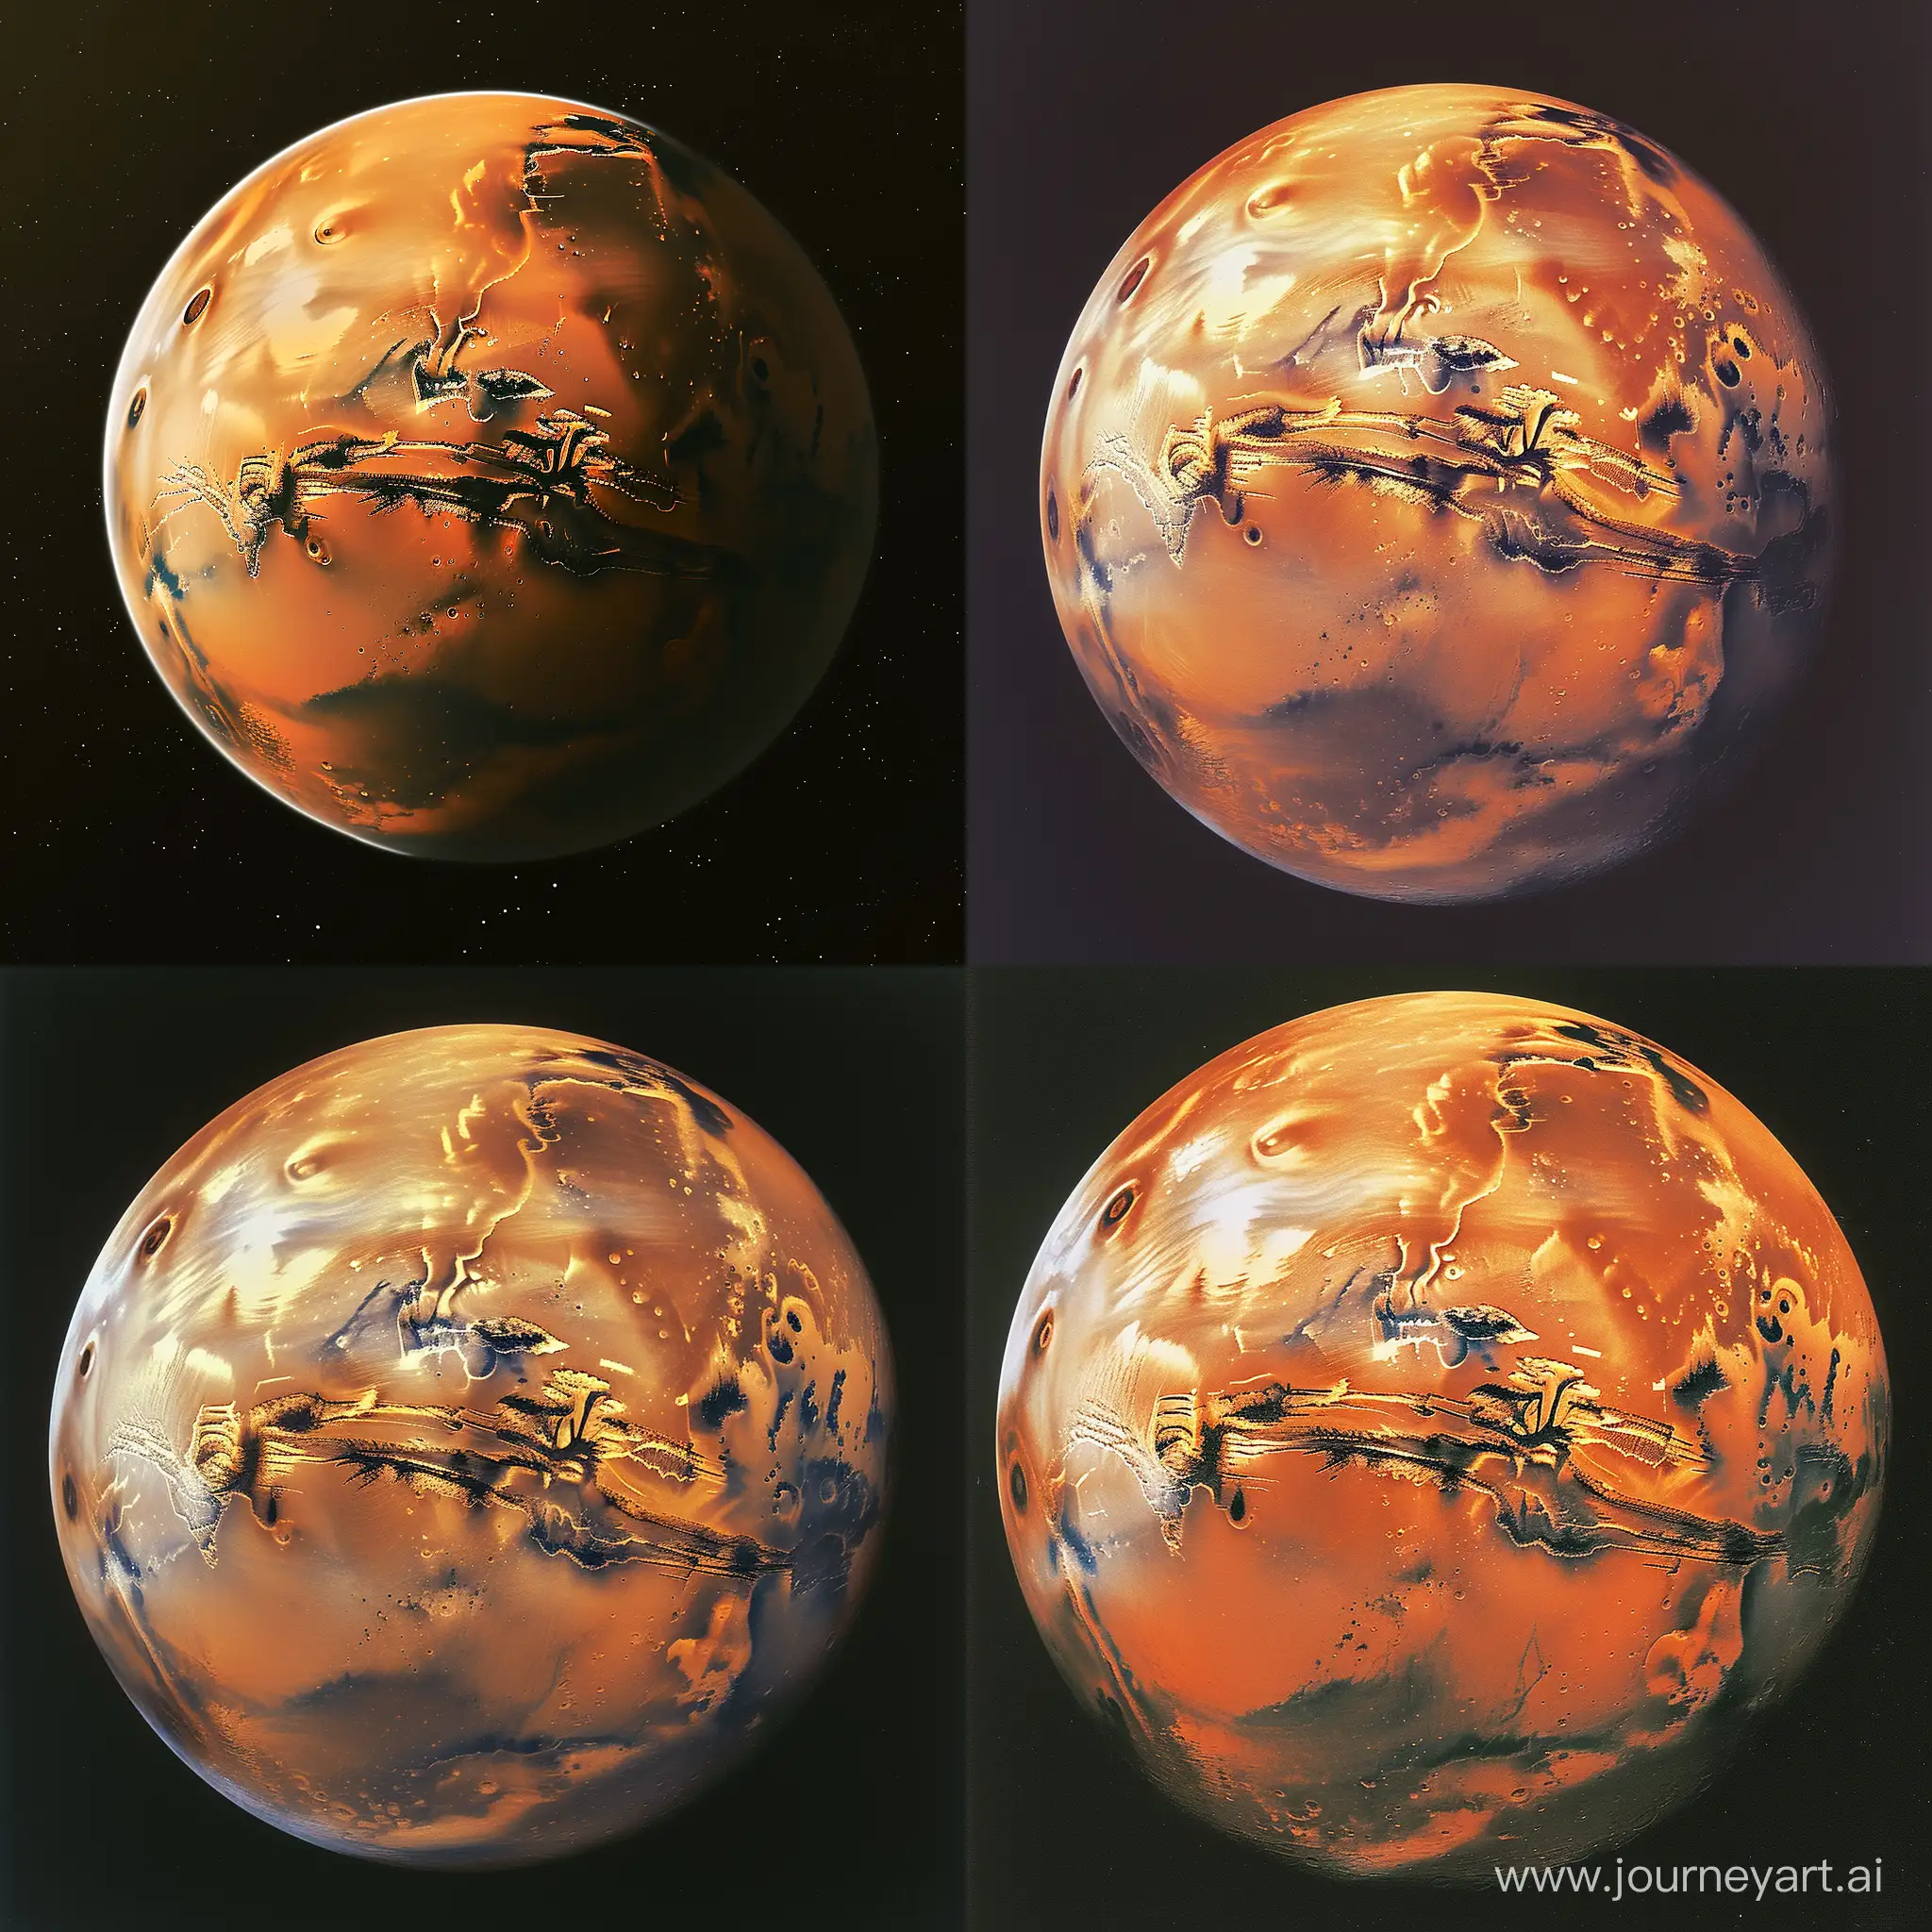 Mars-Exploration-Vehicle-Version-6-in-a-11-Aspect-Ratio-Image-21968